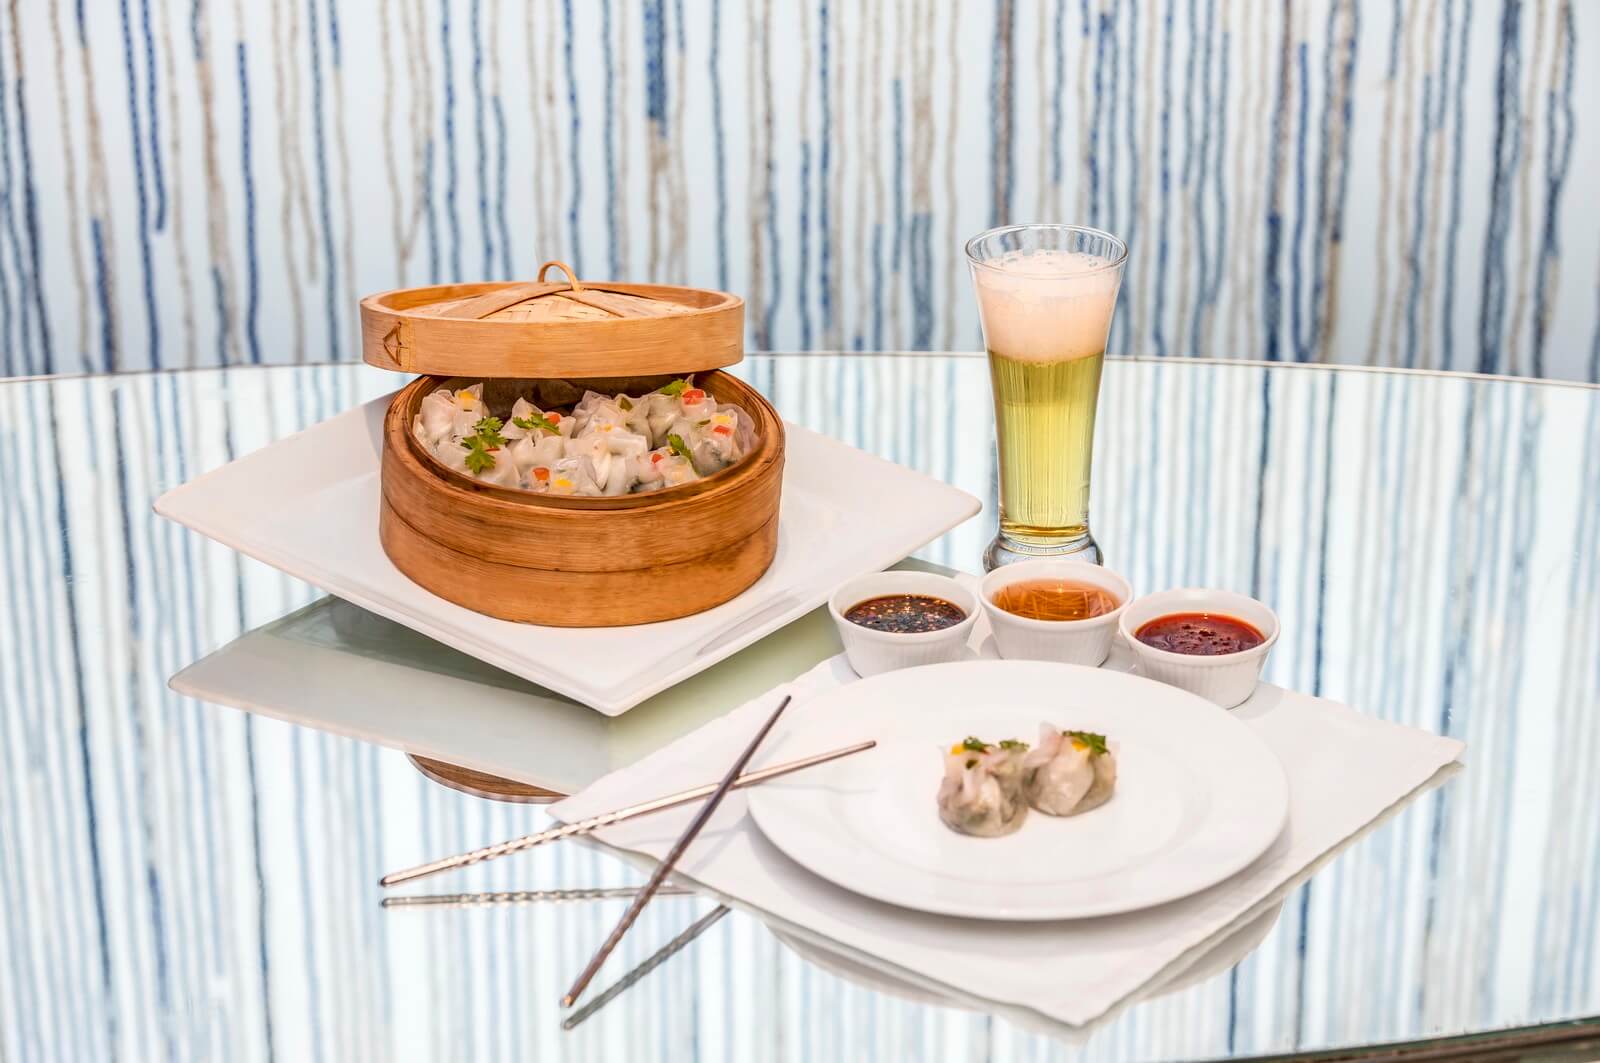 Delicious Traditional Asian Dim sum Dishes in wooden bowls